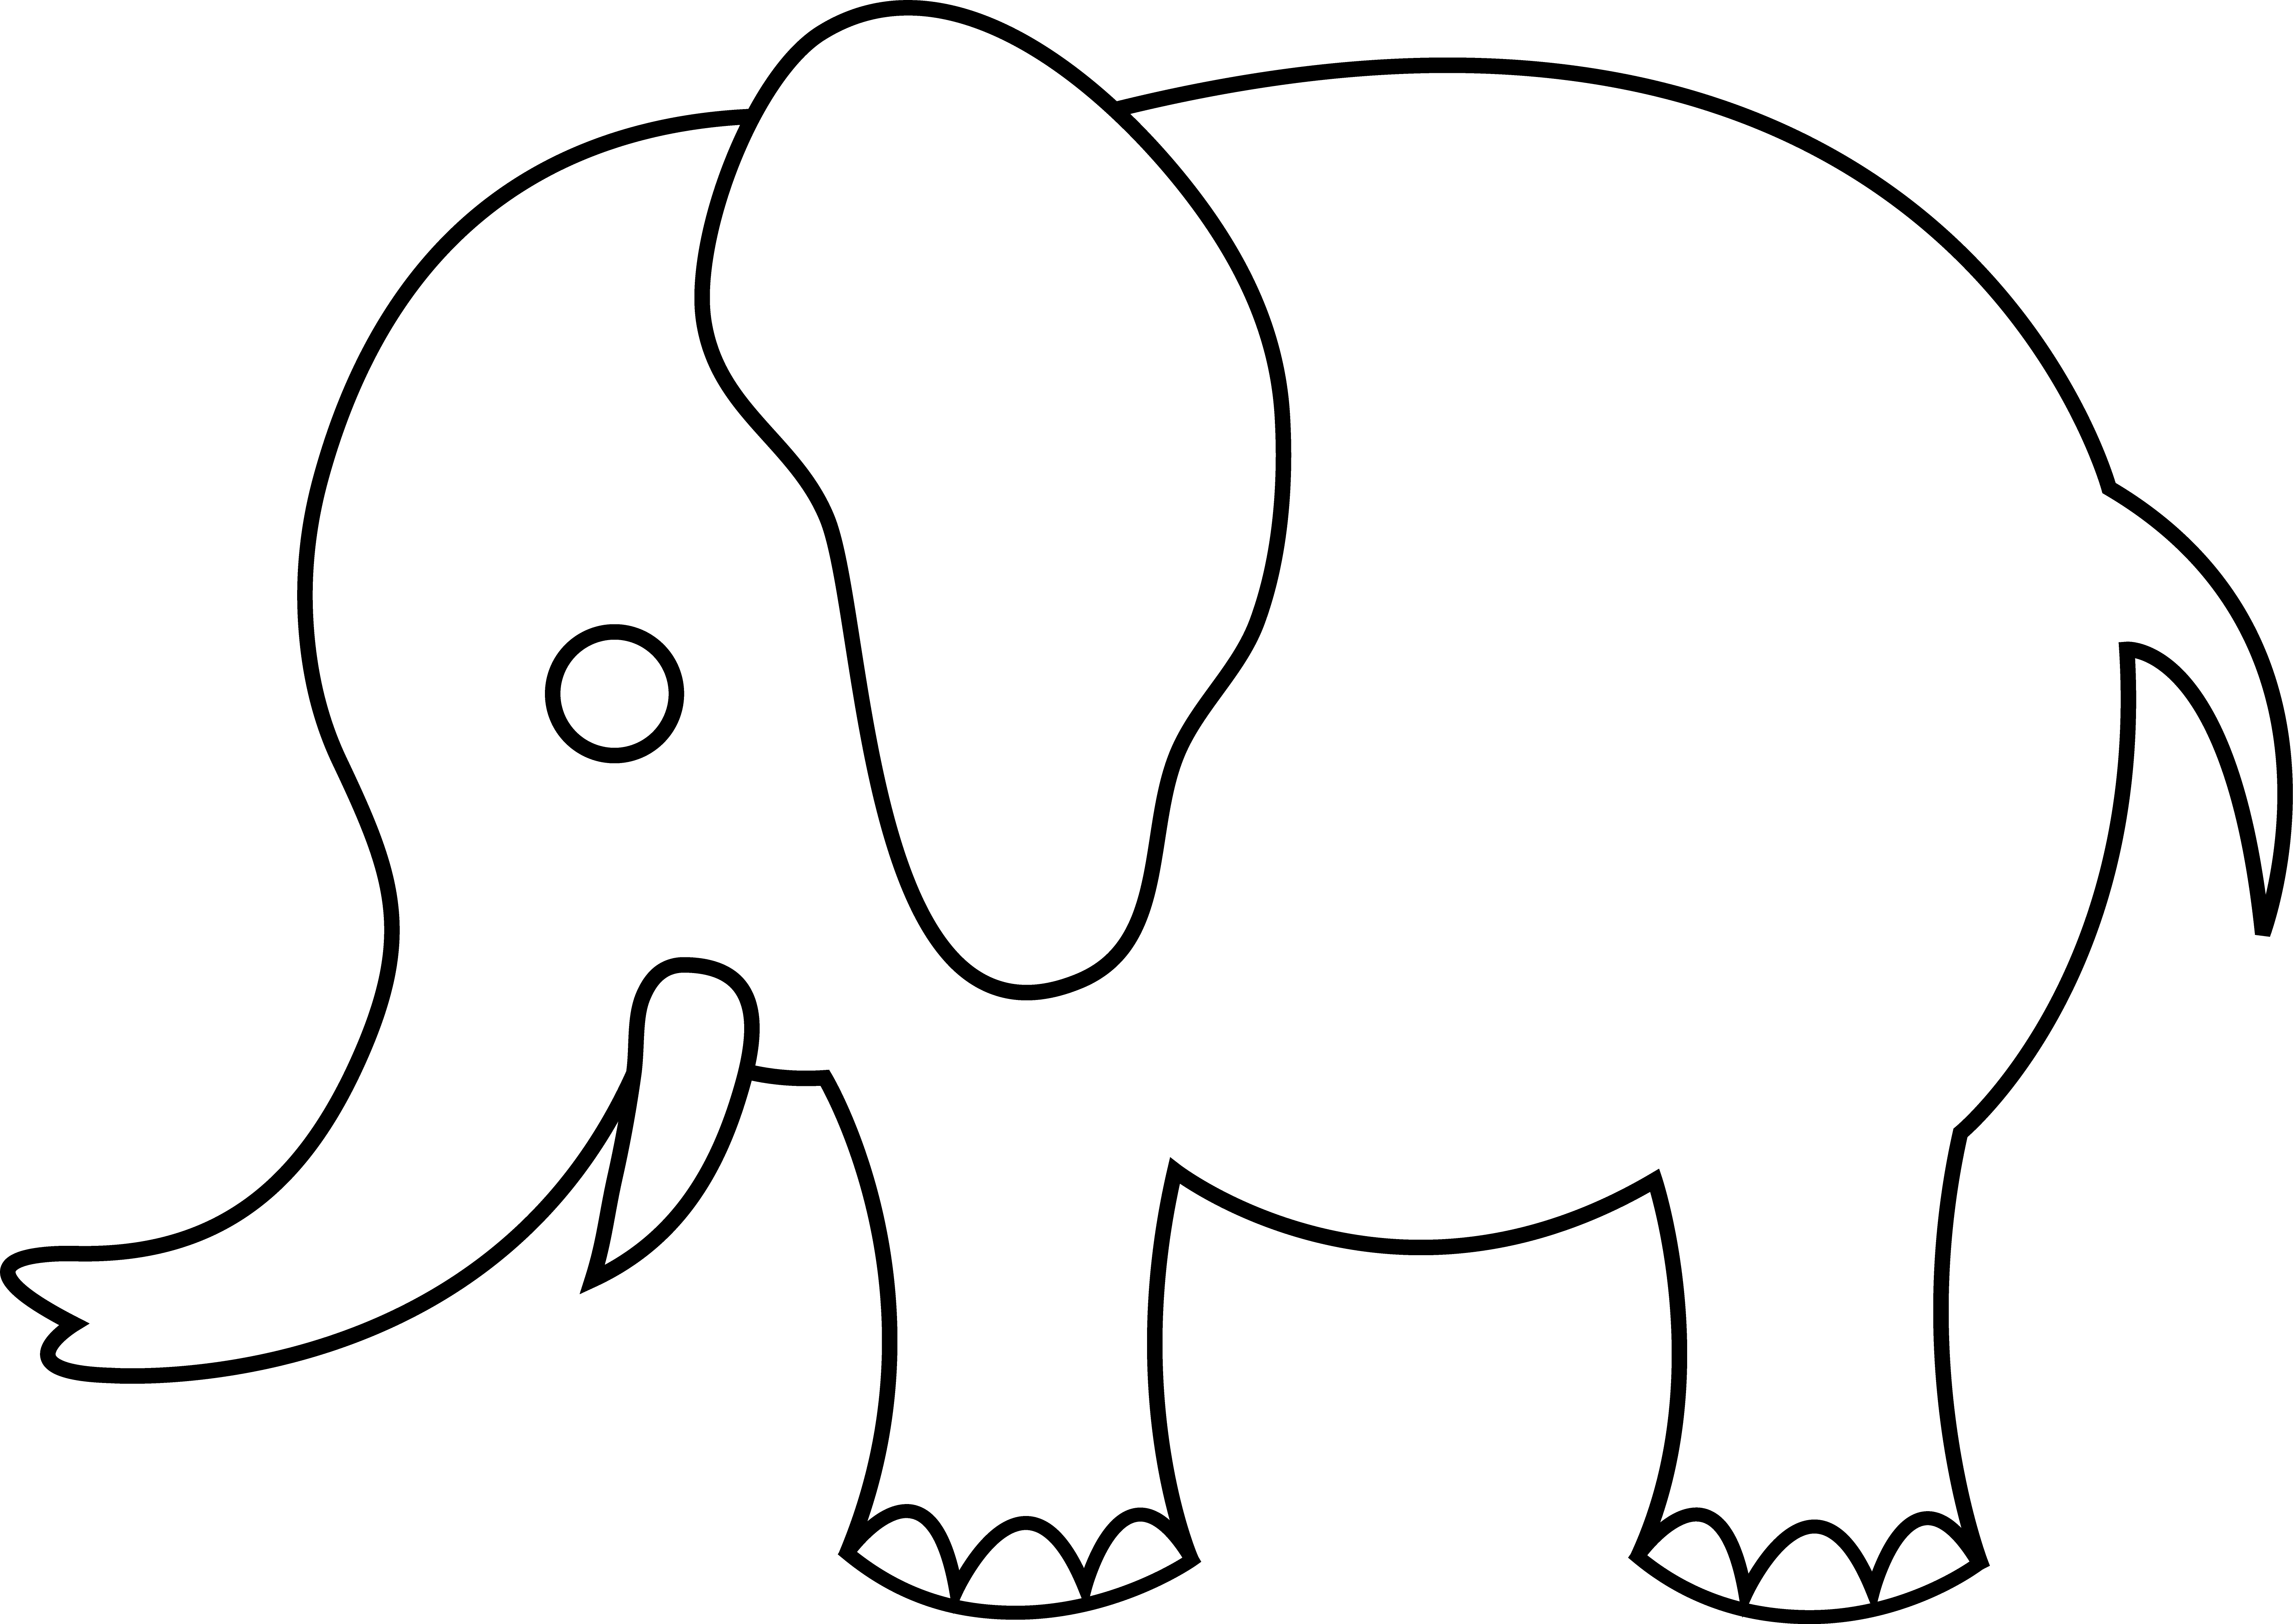 free-outline-of-an-elephant-download-free-outline-of-an-elephant-png